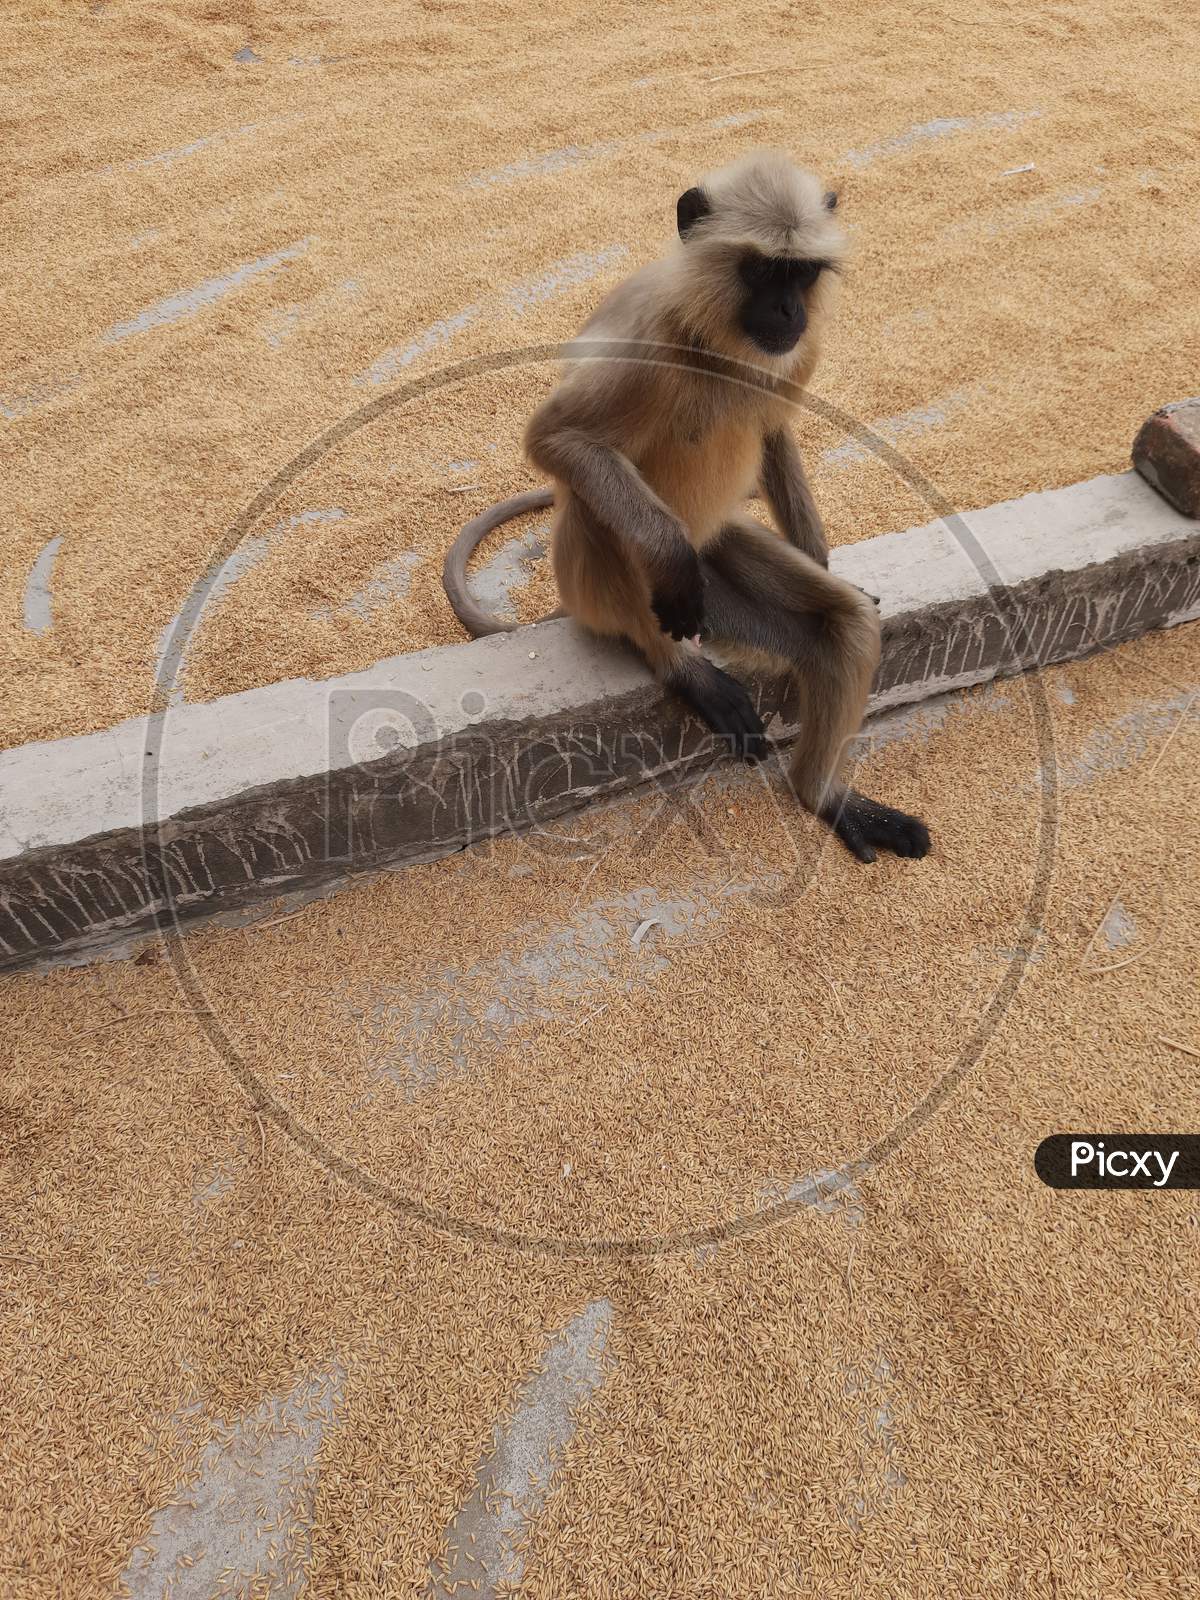 A monkey image in home, Background Blur, monkey photo